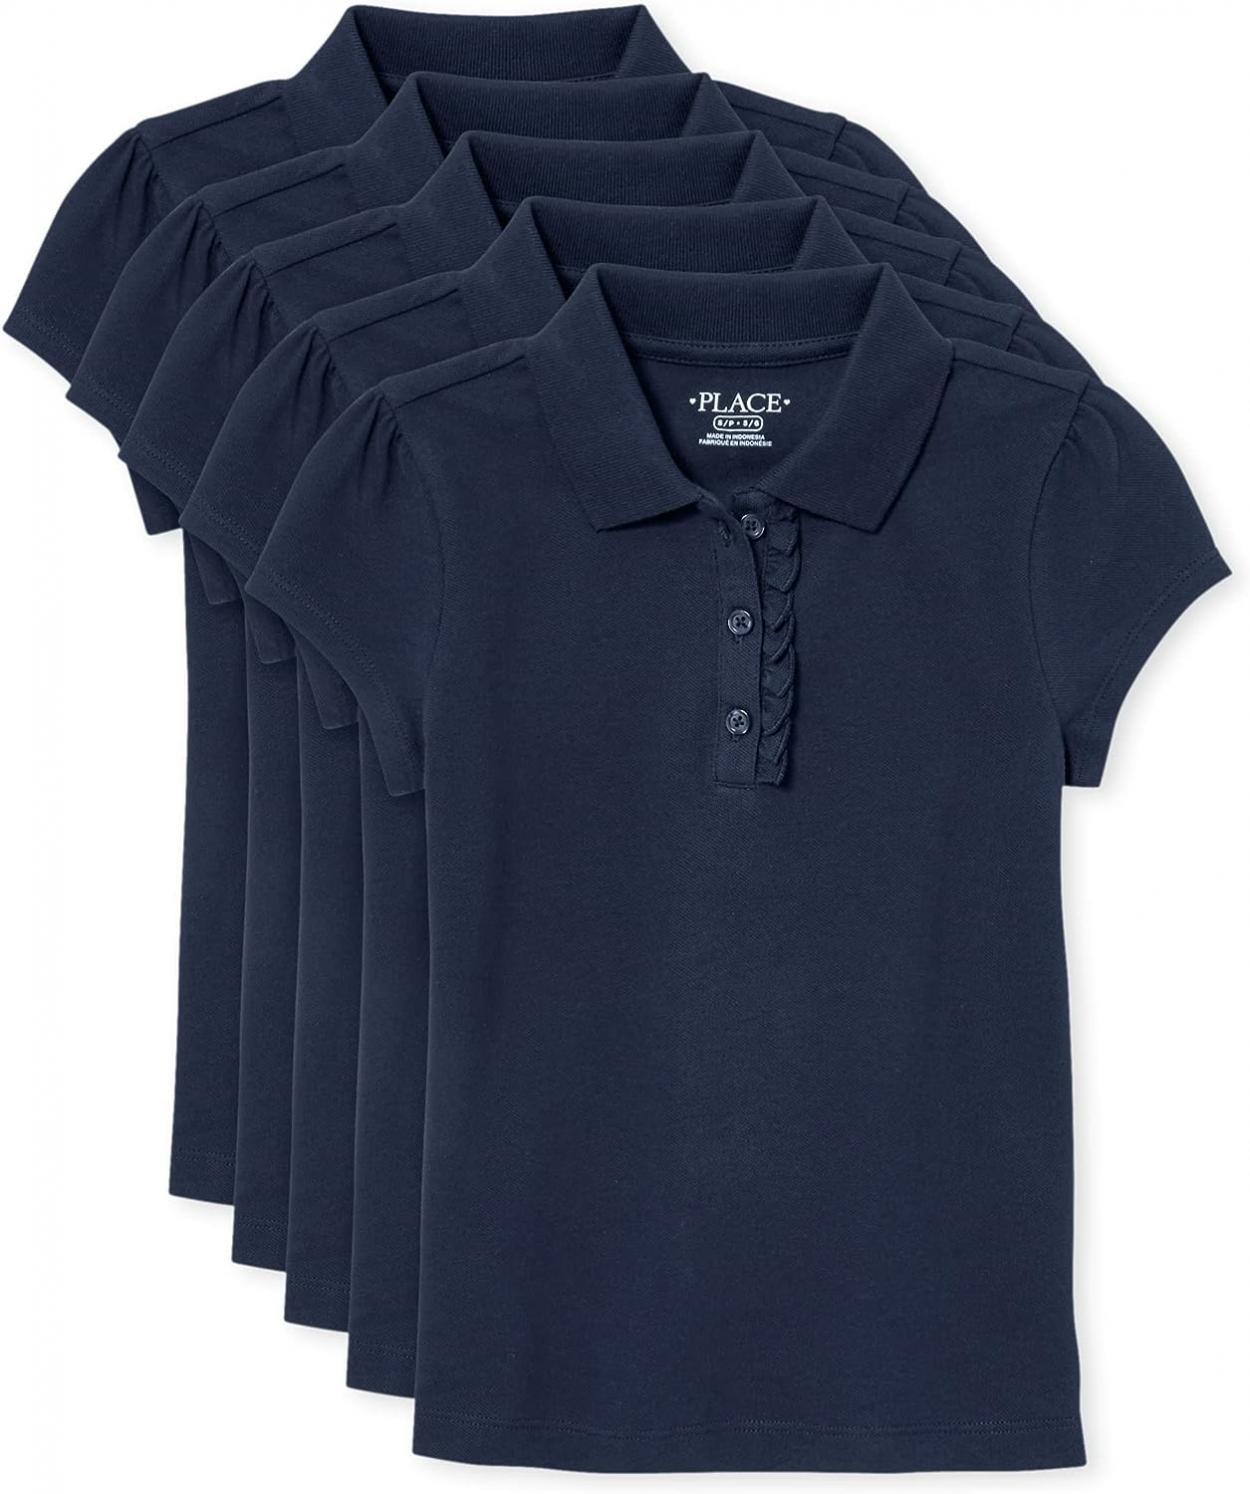 The Children's Place Girls' Multipack Short Sleeve Ruffle Pique Polos